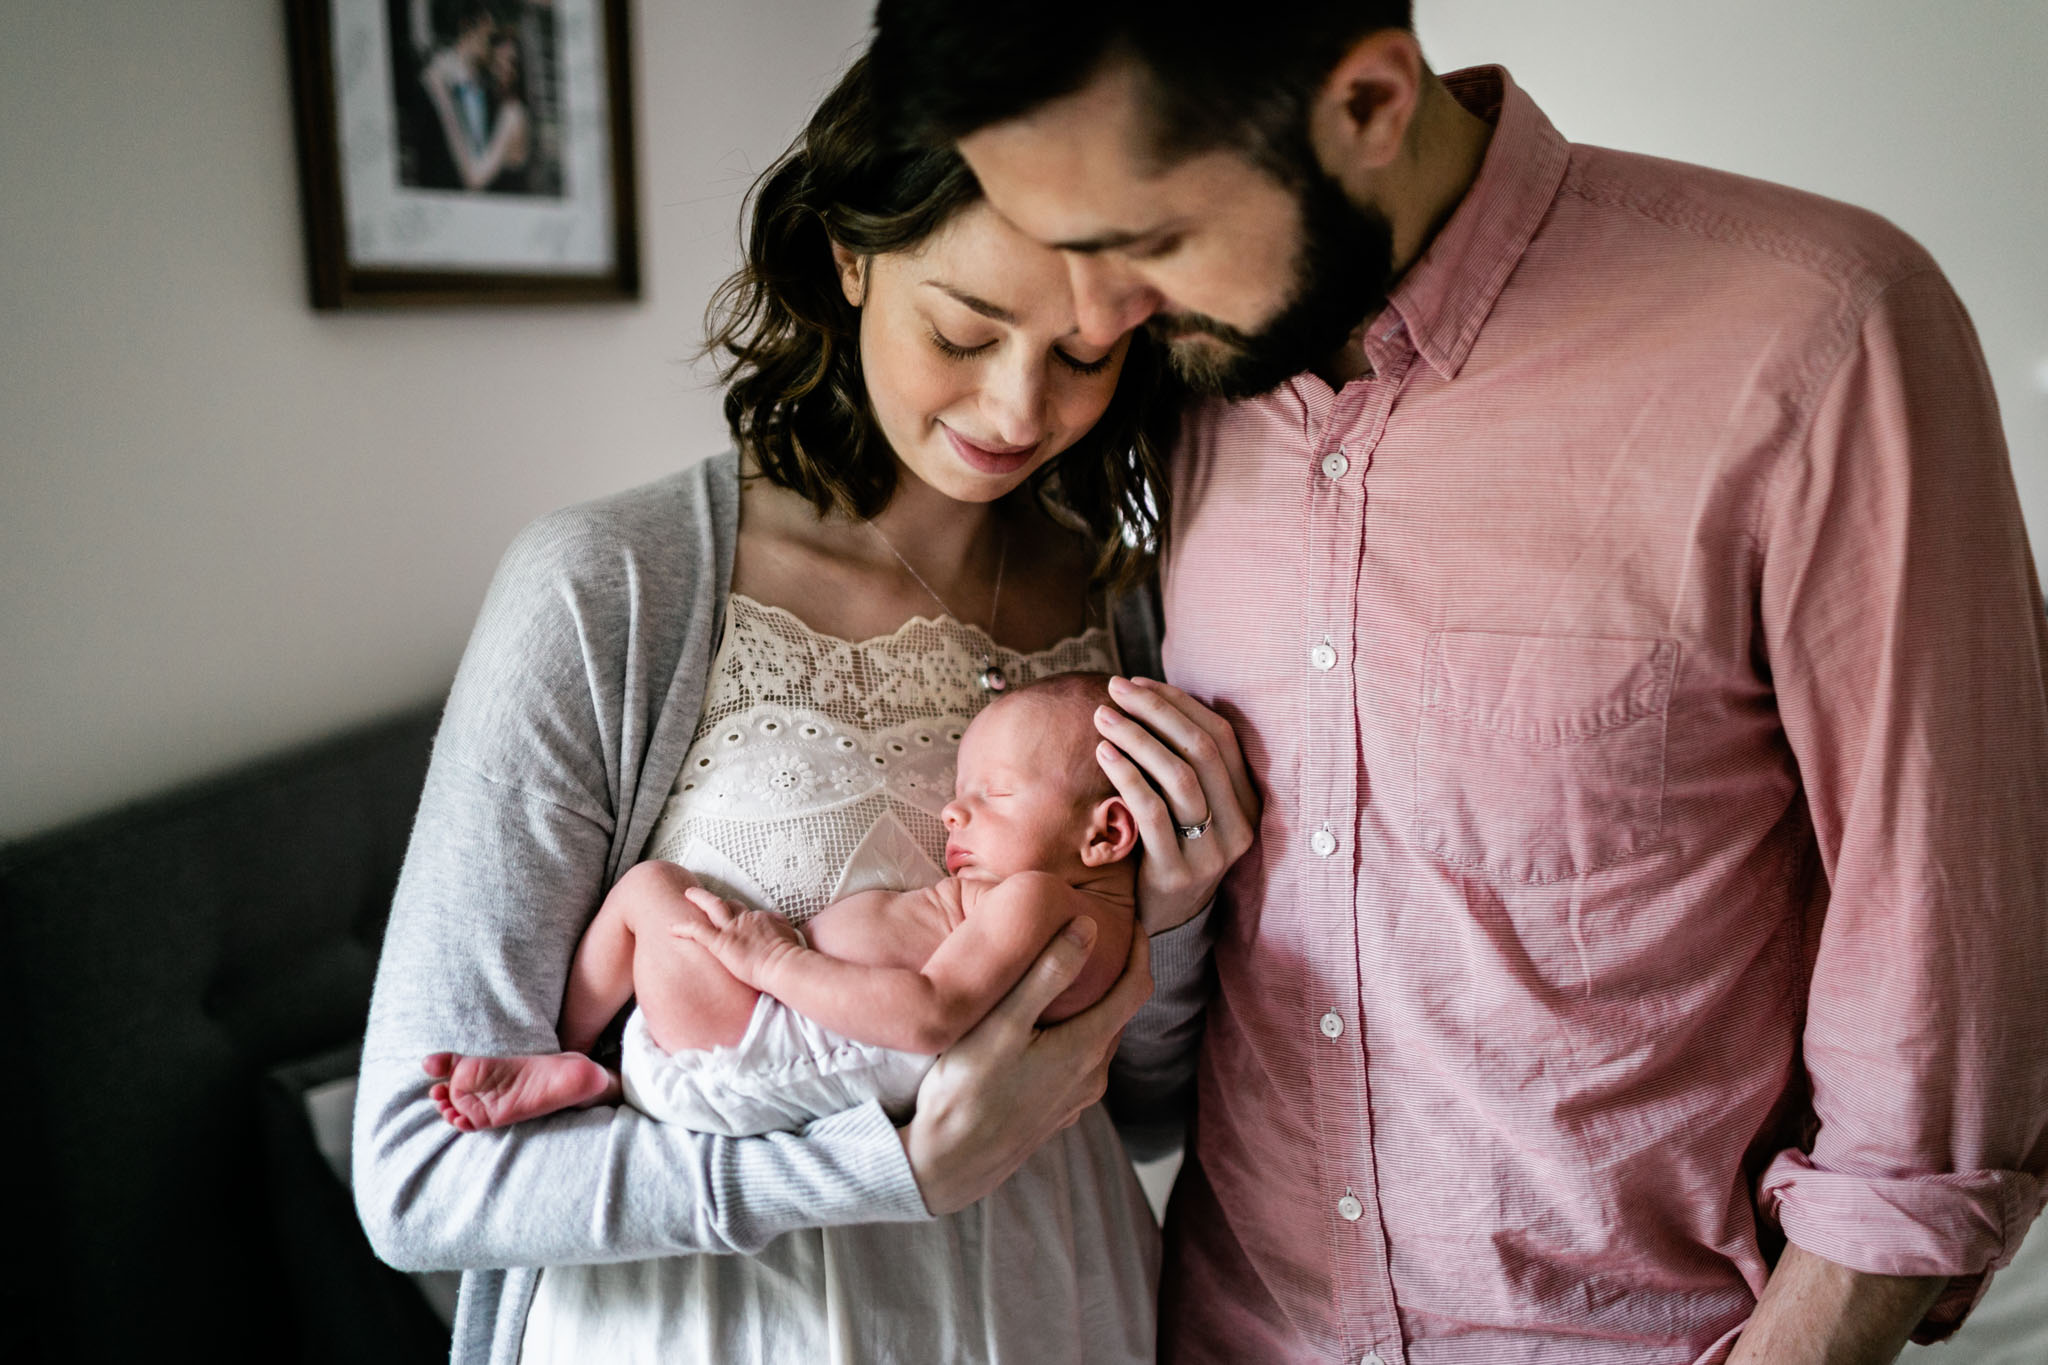 Durham Newborn Photographer | By G. Lin Photography | Lifestyle Newborn photography at home with parents holding baby